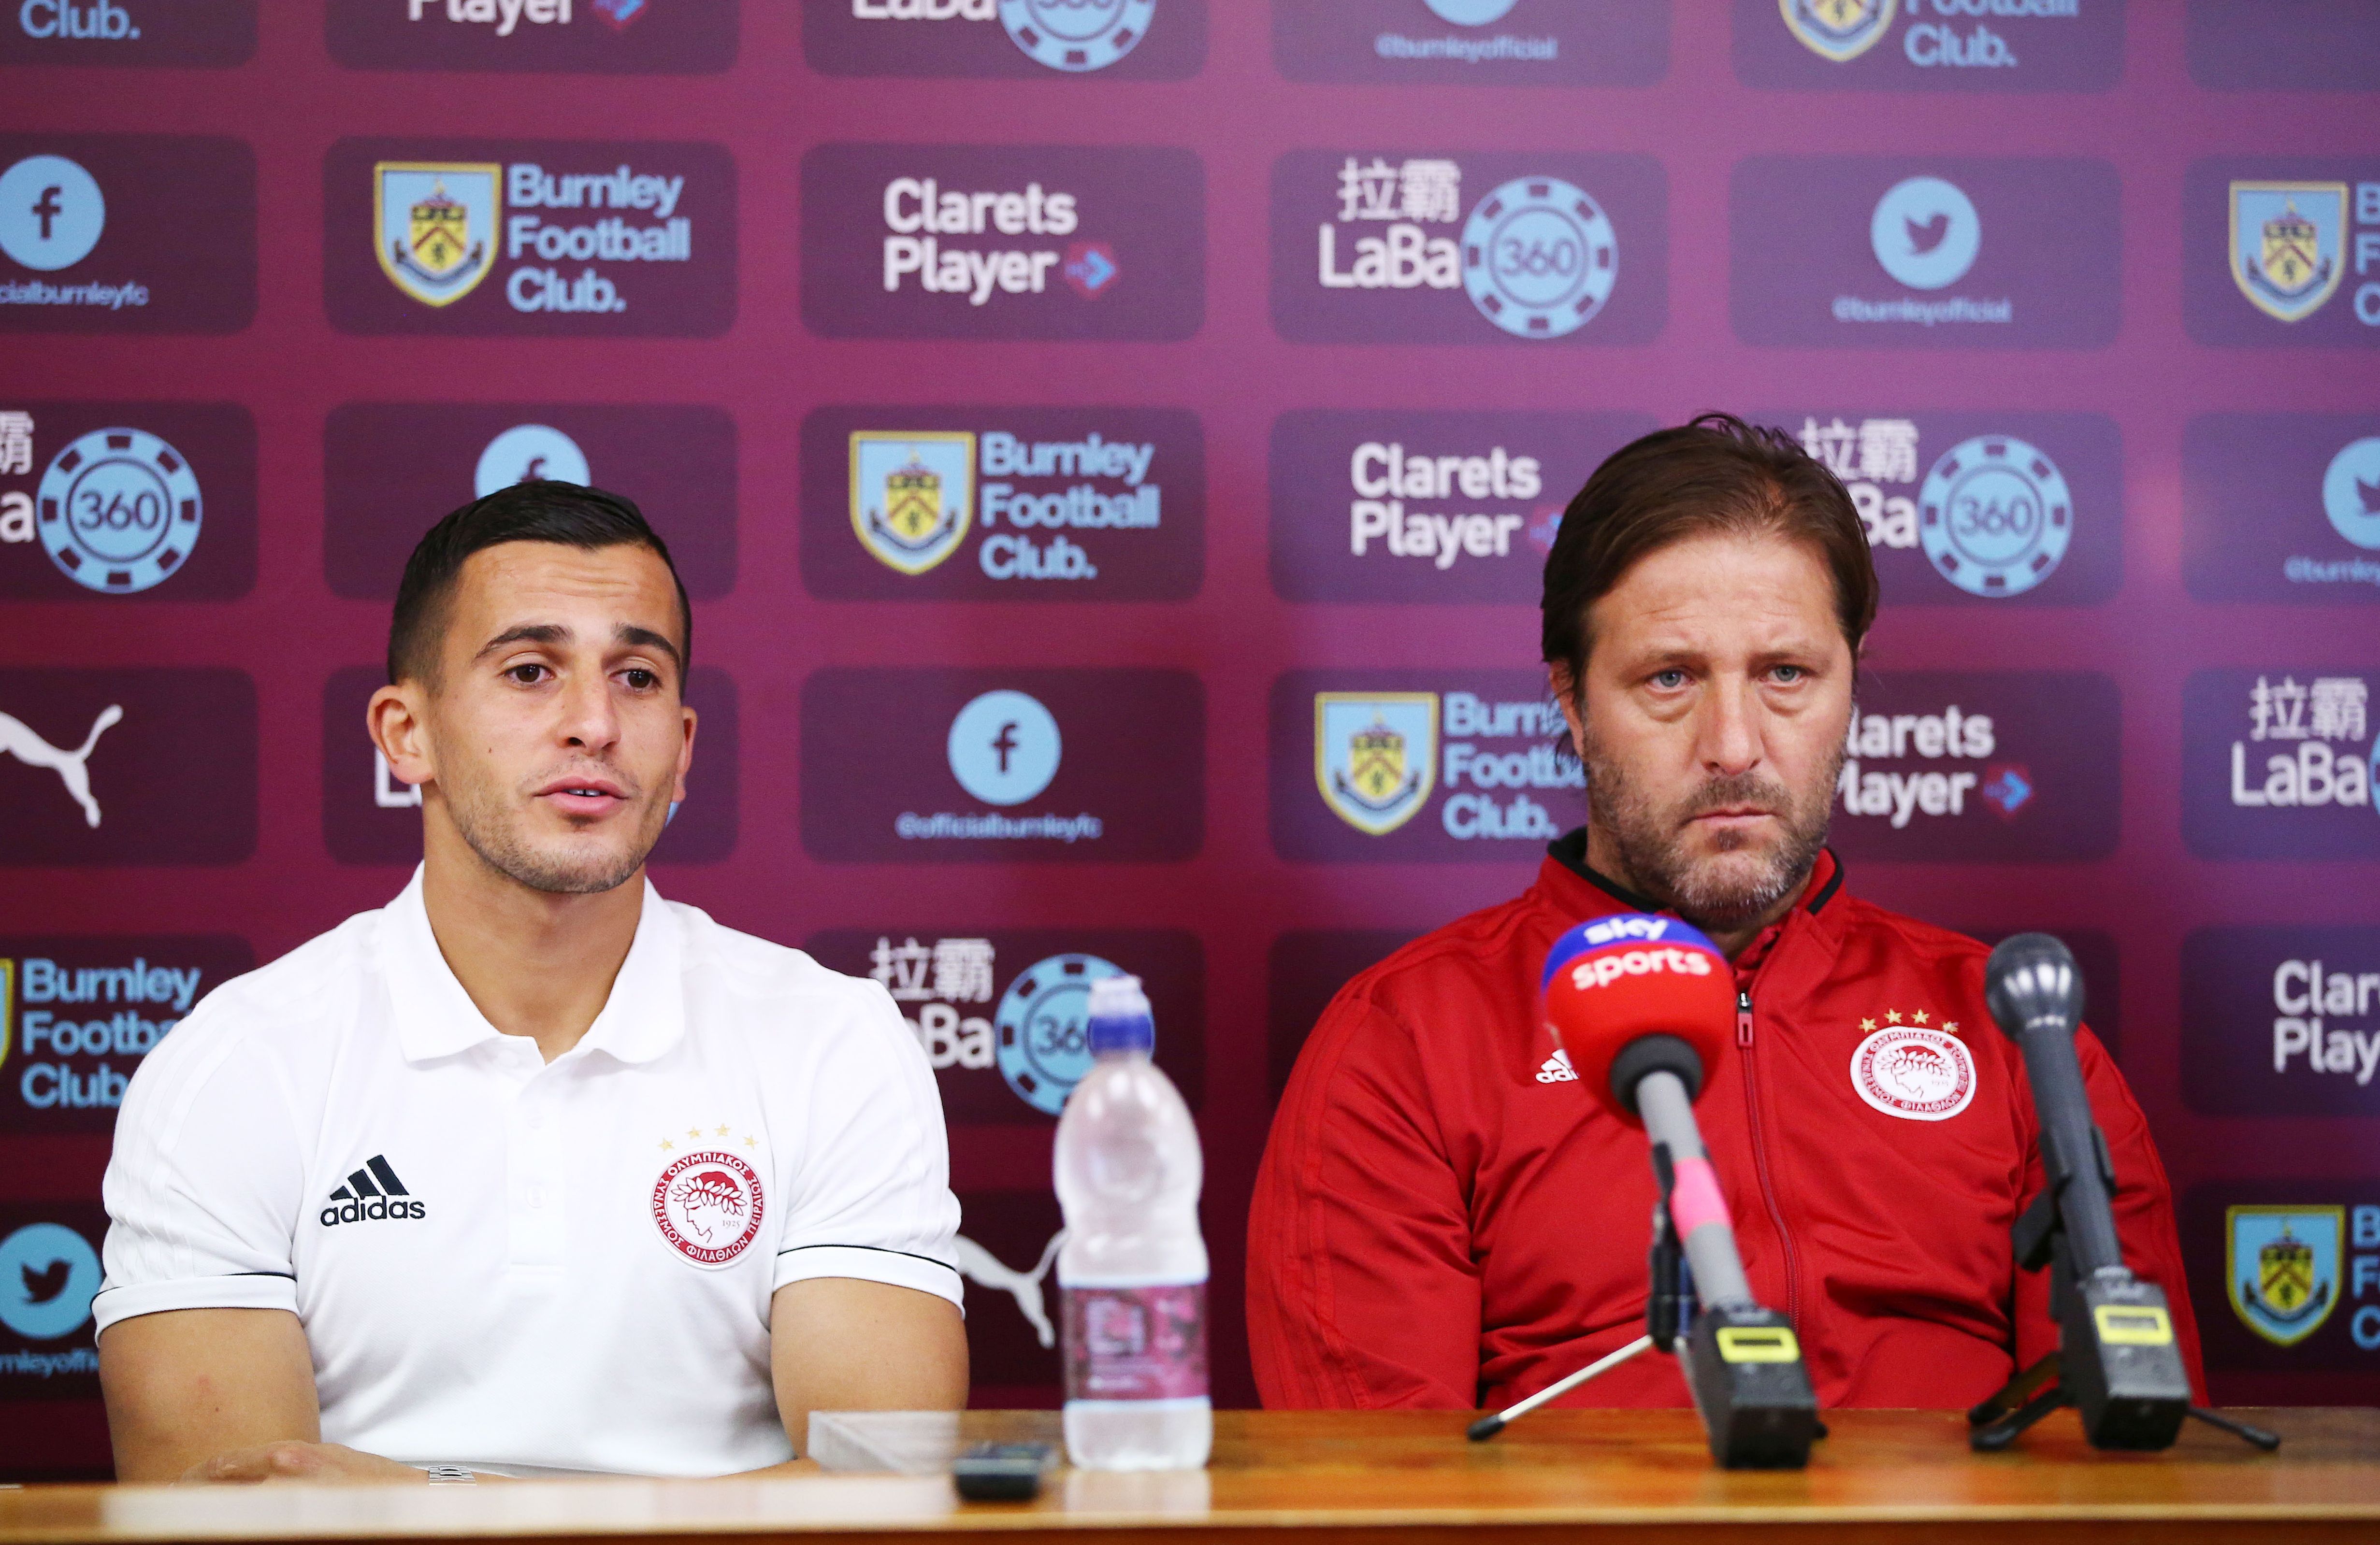 Press Conference ahead of the match vs Burnley FC